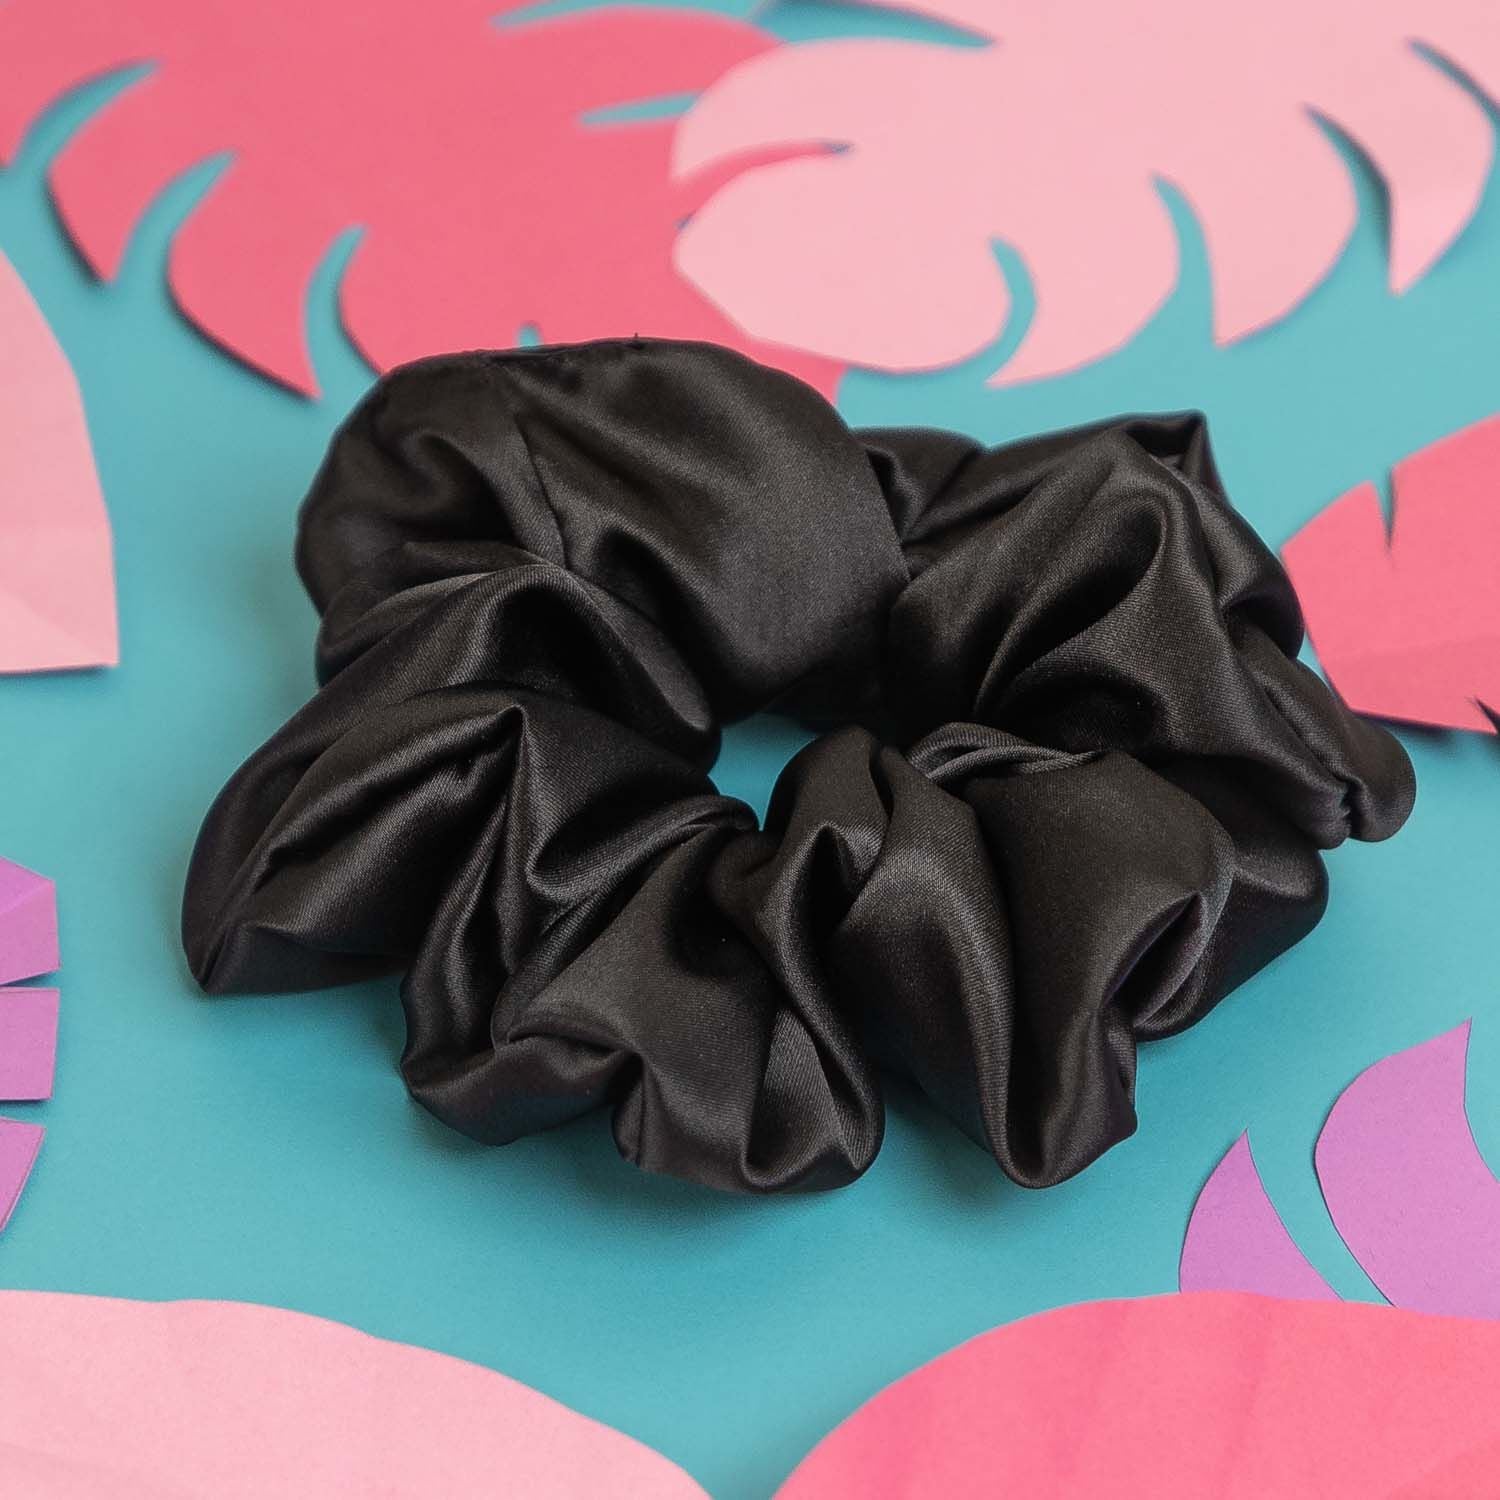 Veronica Headband in Black Satin with Large Scrunchie